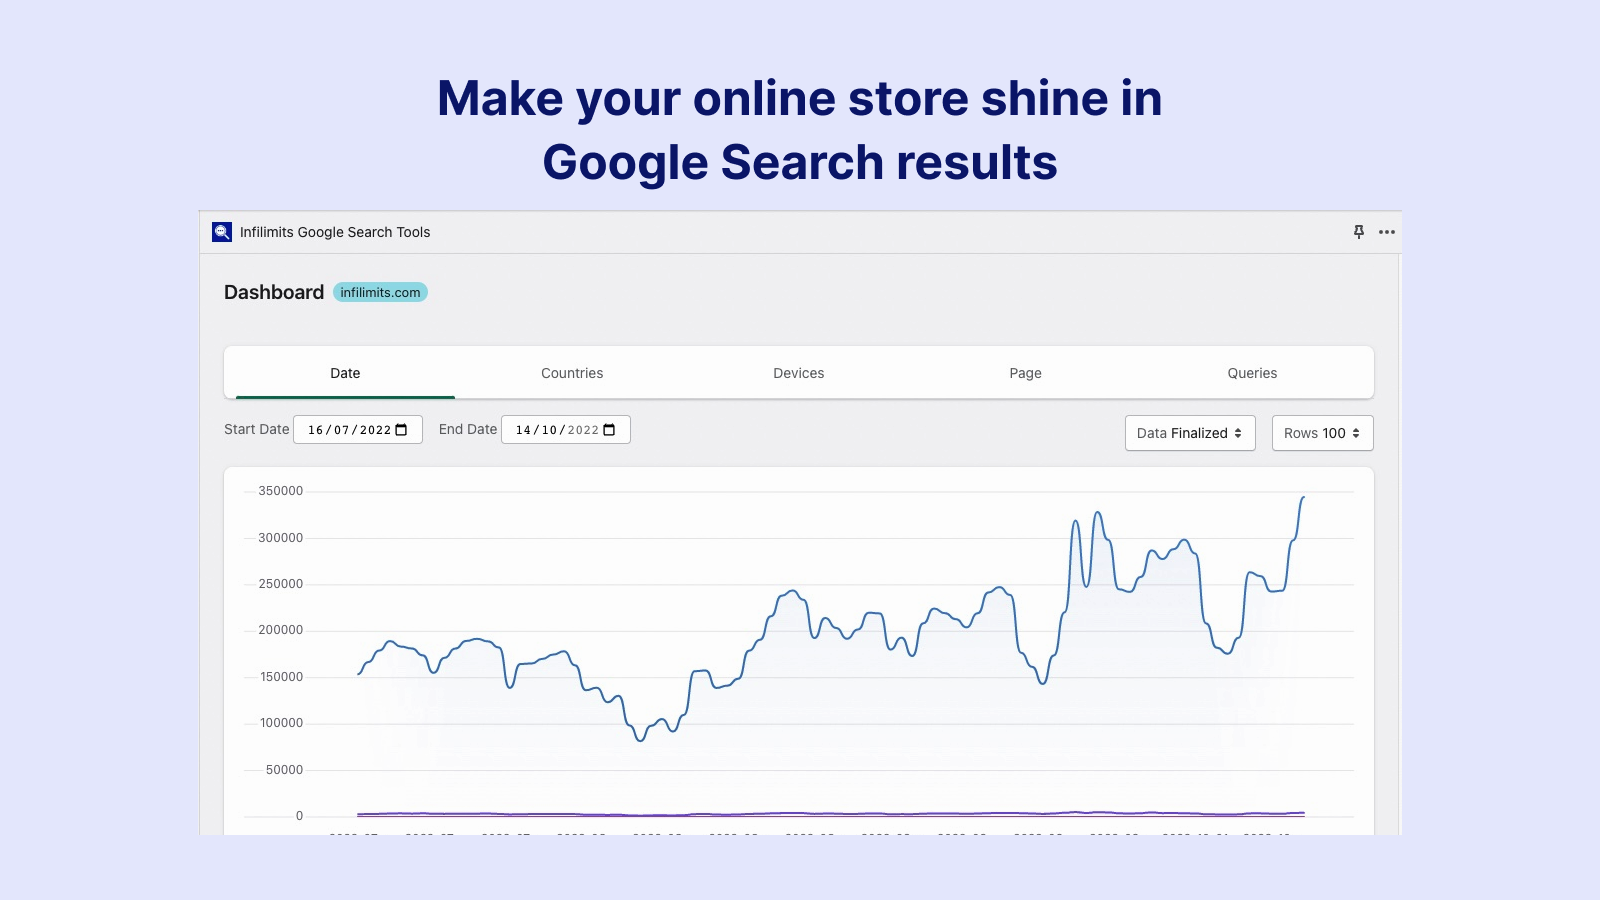 Make your online store shine in Google Search results